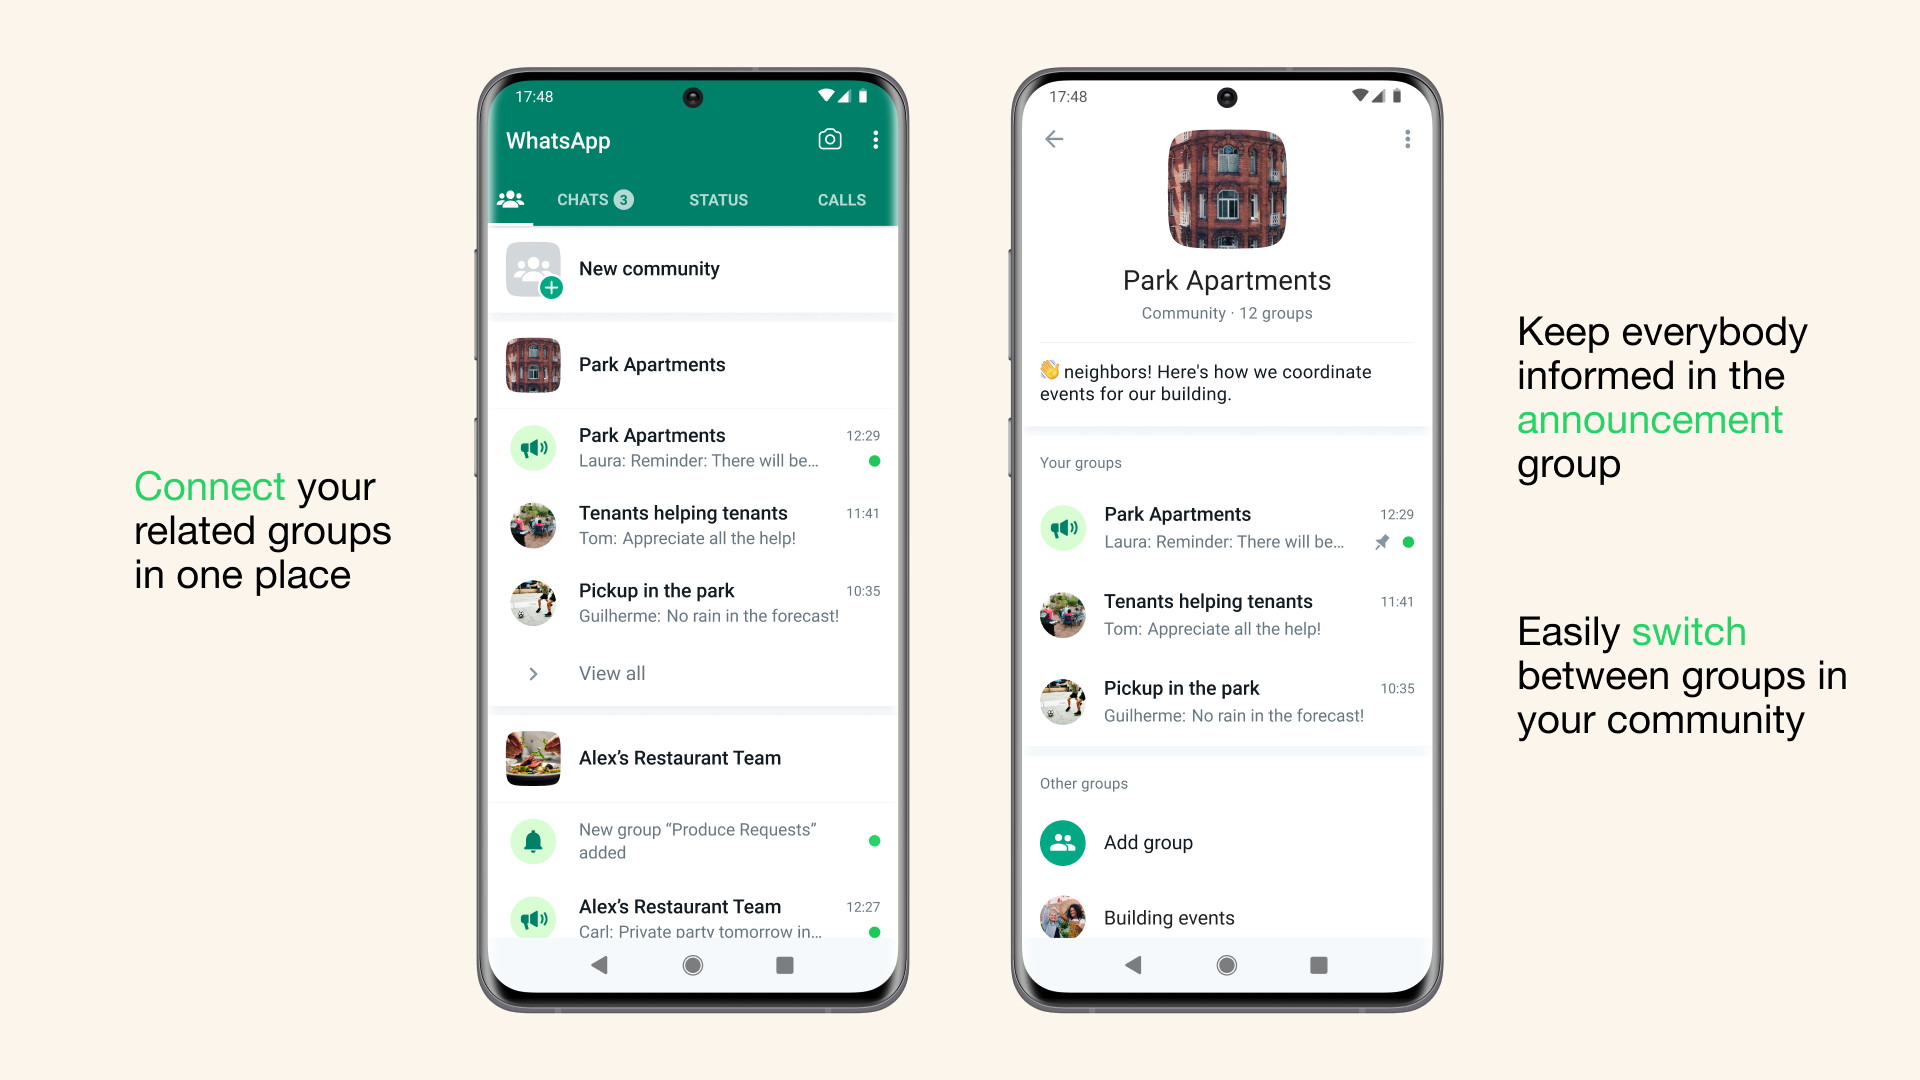 WhatsApp Officially Launches its New Communities A Brand-New Discussion Group Feature 